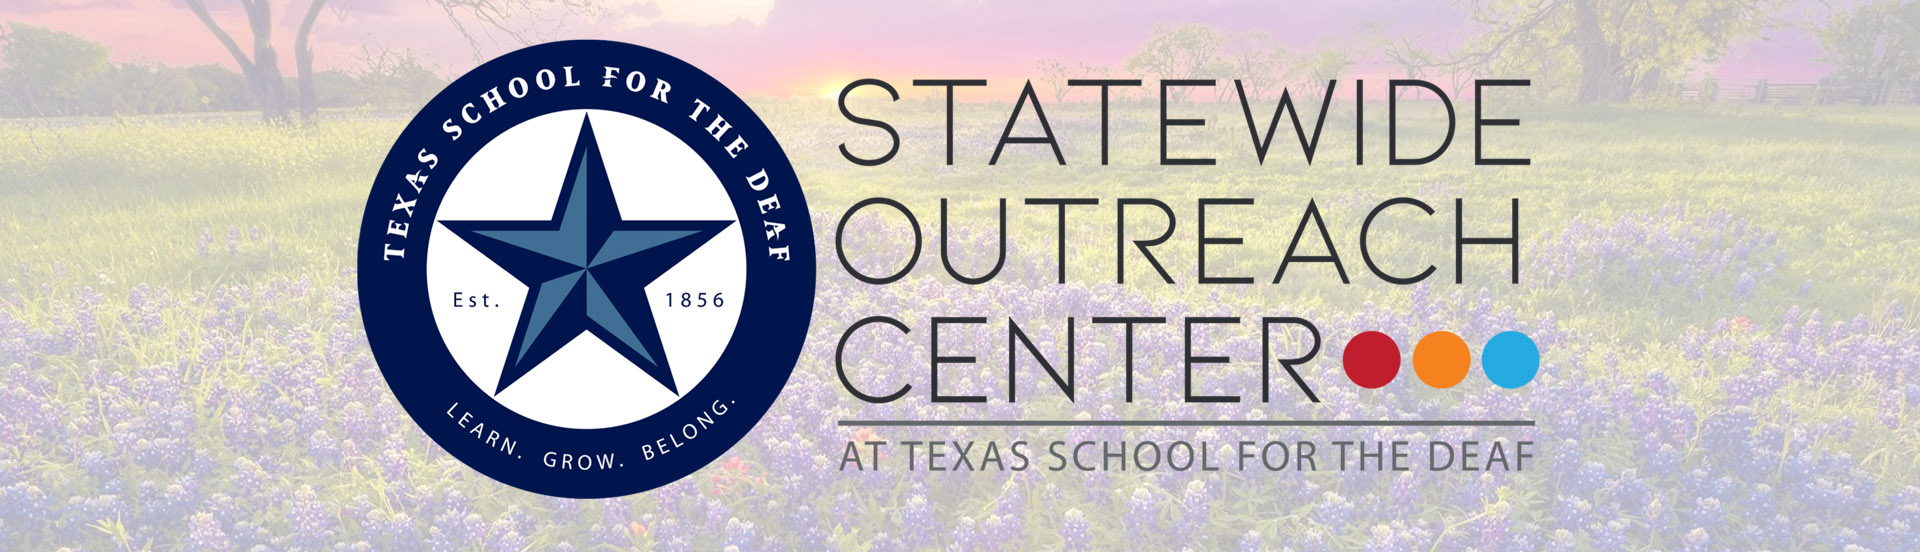 Image for Statewide Outreach Center (SOC) at Texas School for the Deaf